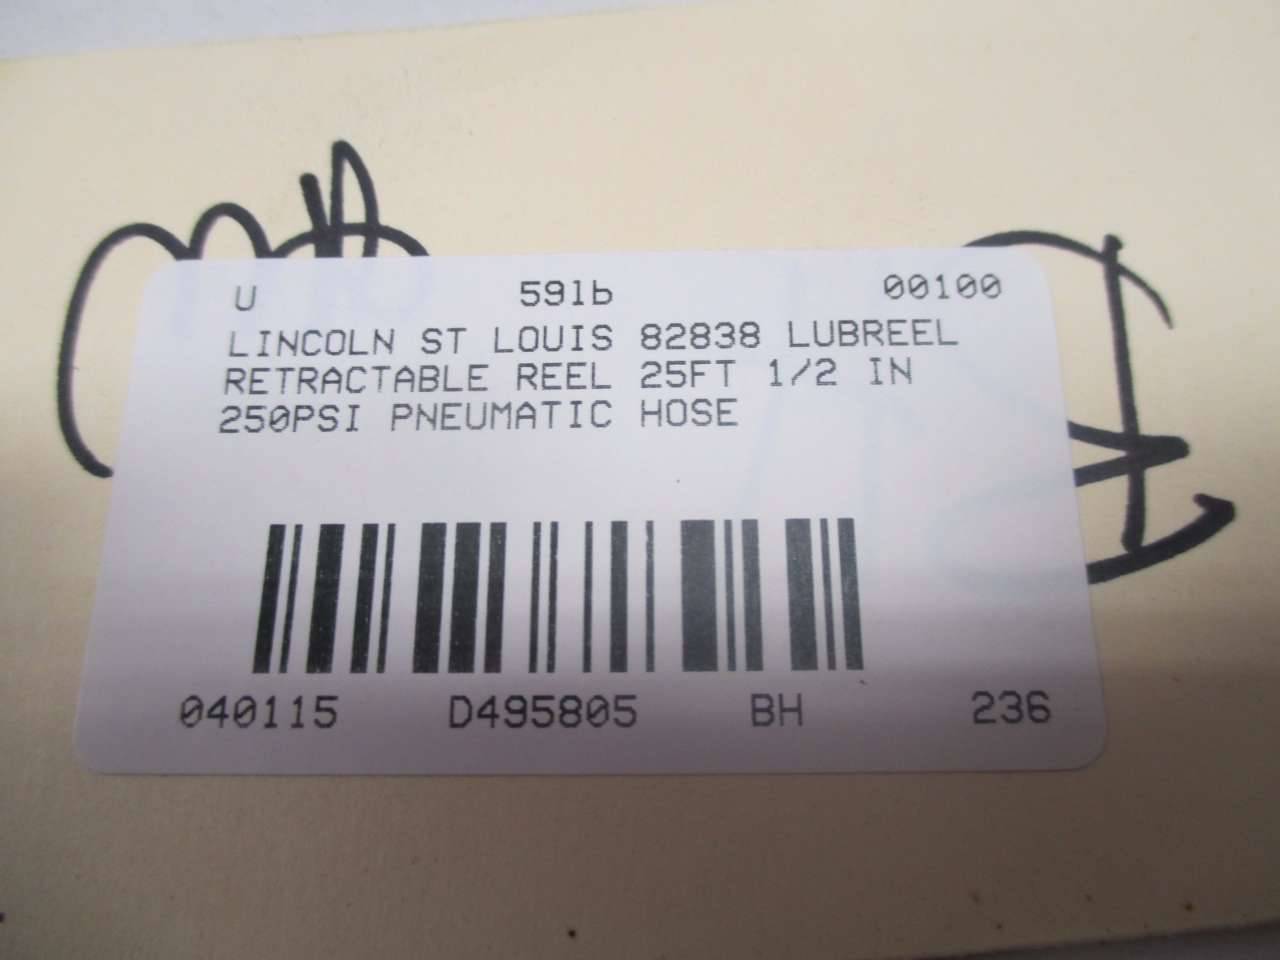 Lincoln 82838 Lubreel 25ft 1/2in 250psi Pneumatic Hose Retractable